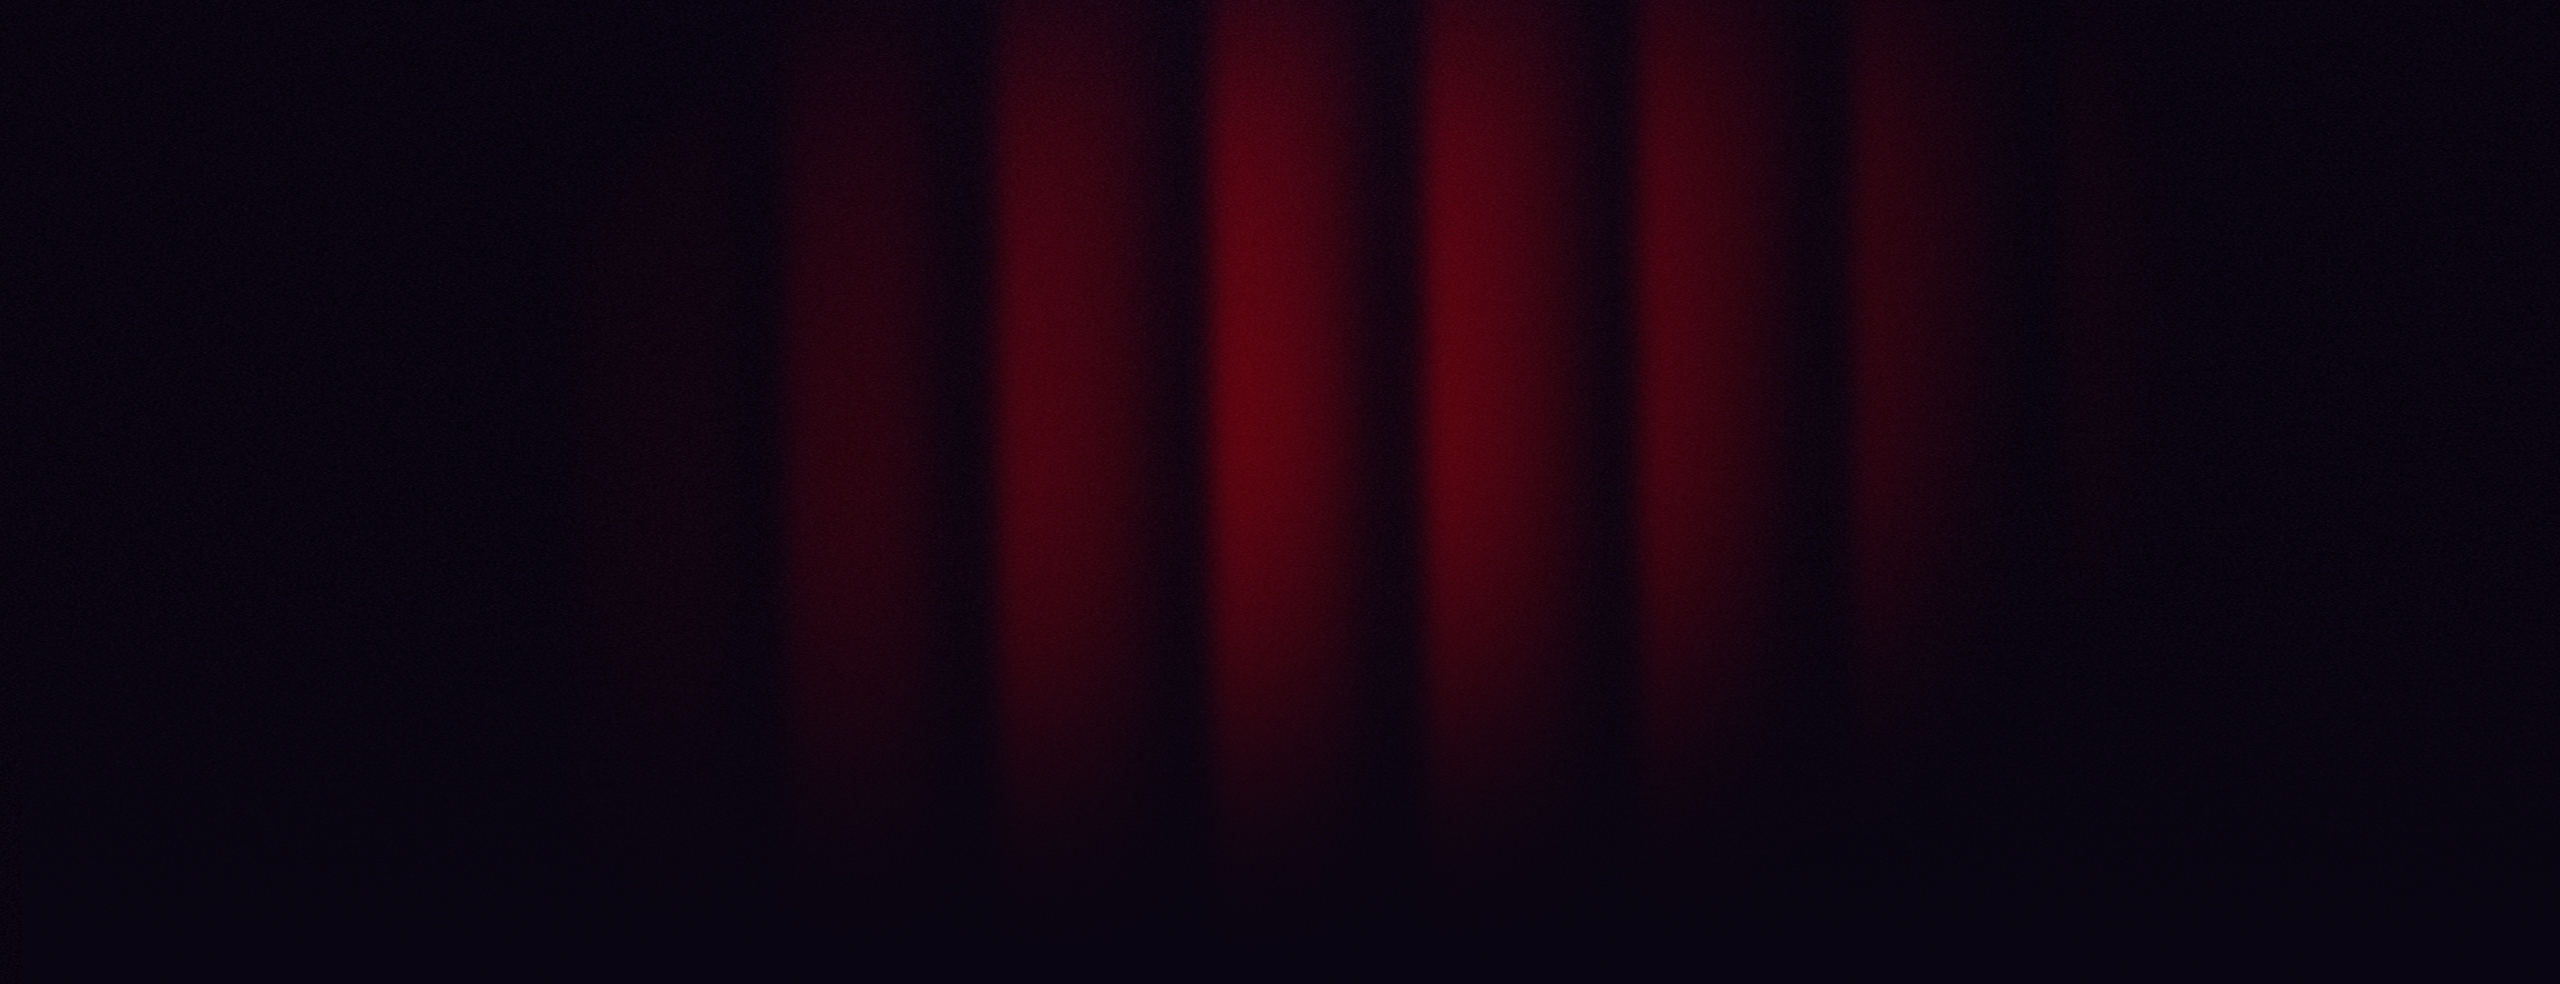 PlayStation at the movies background